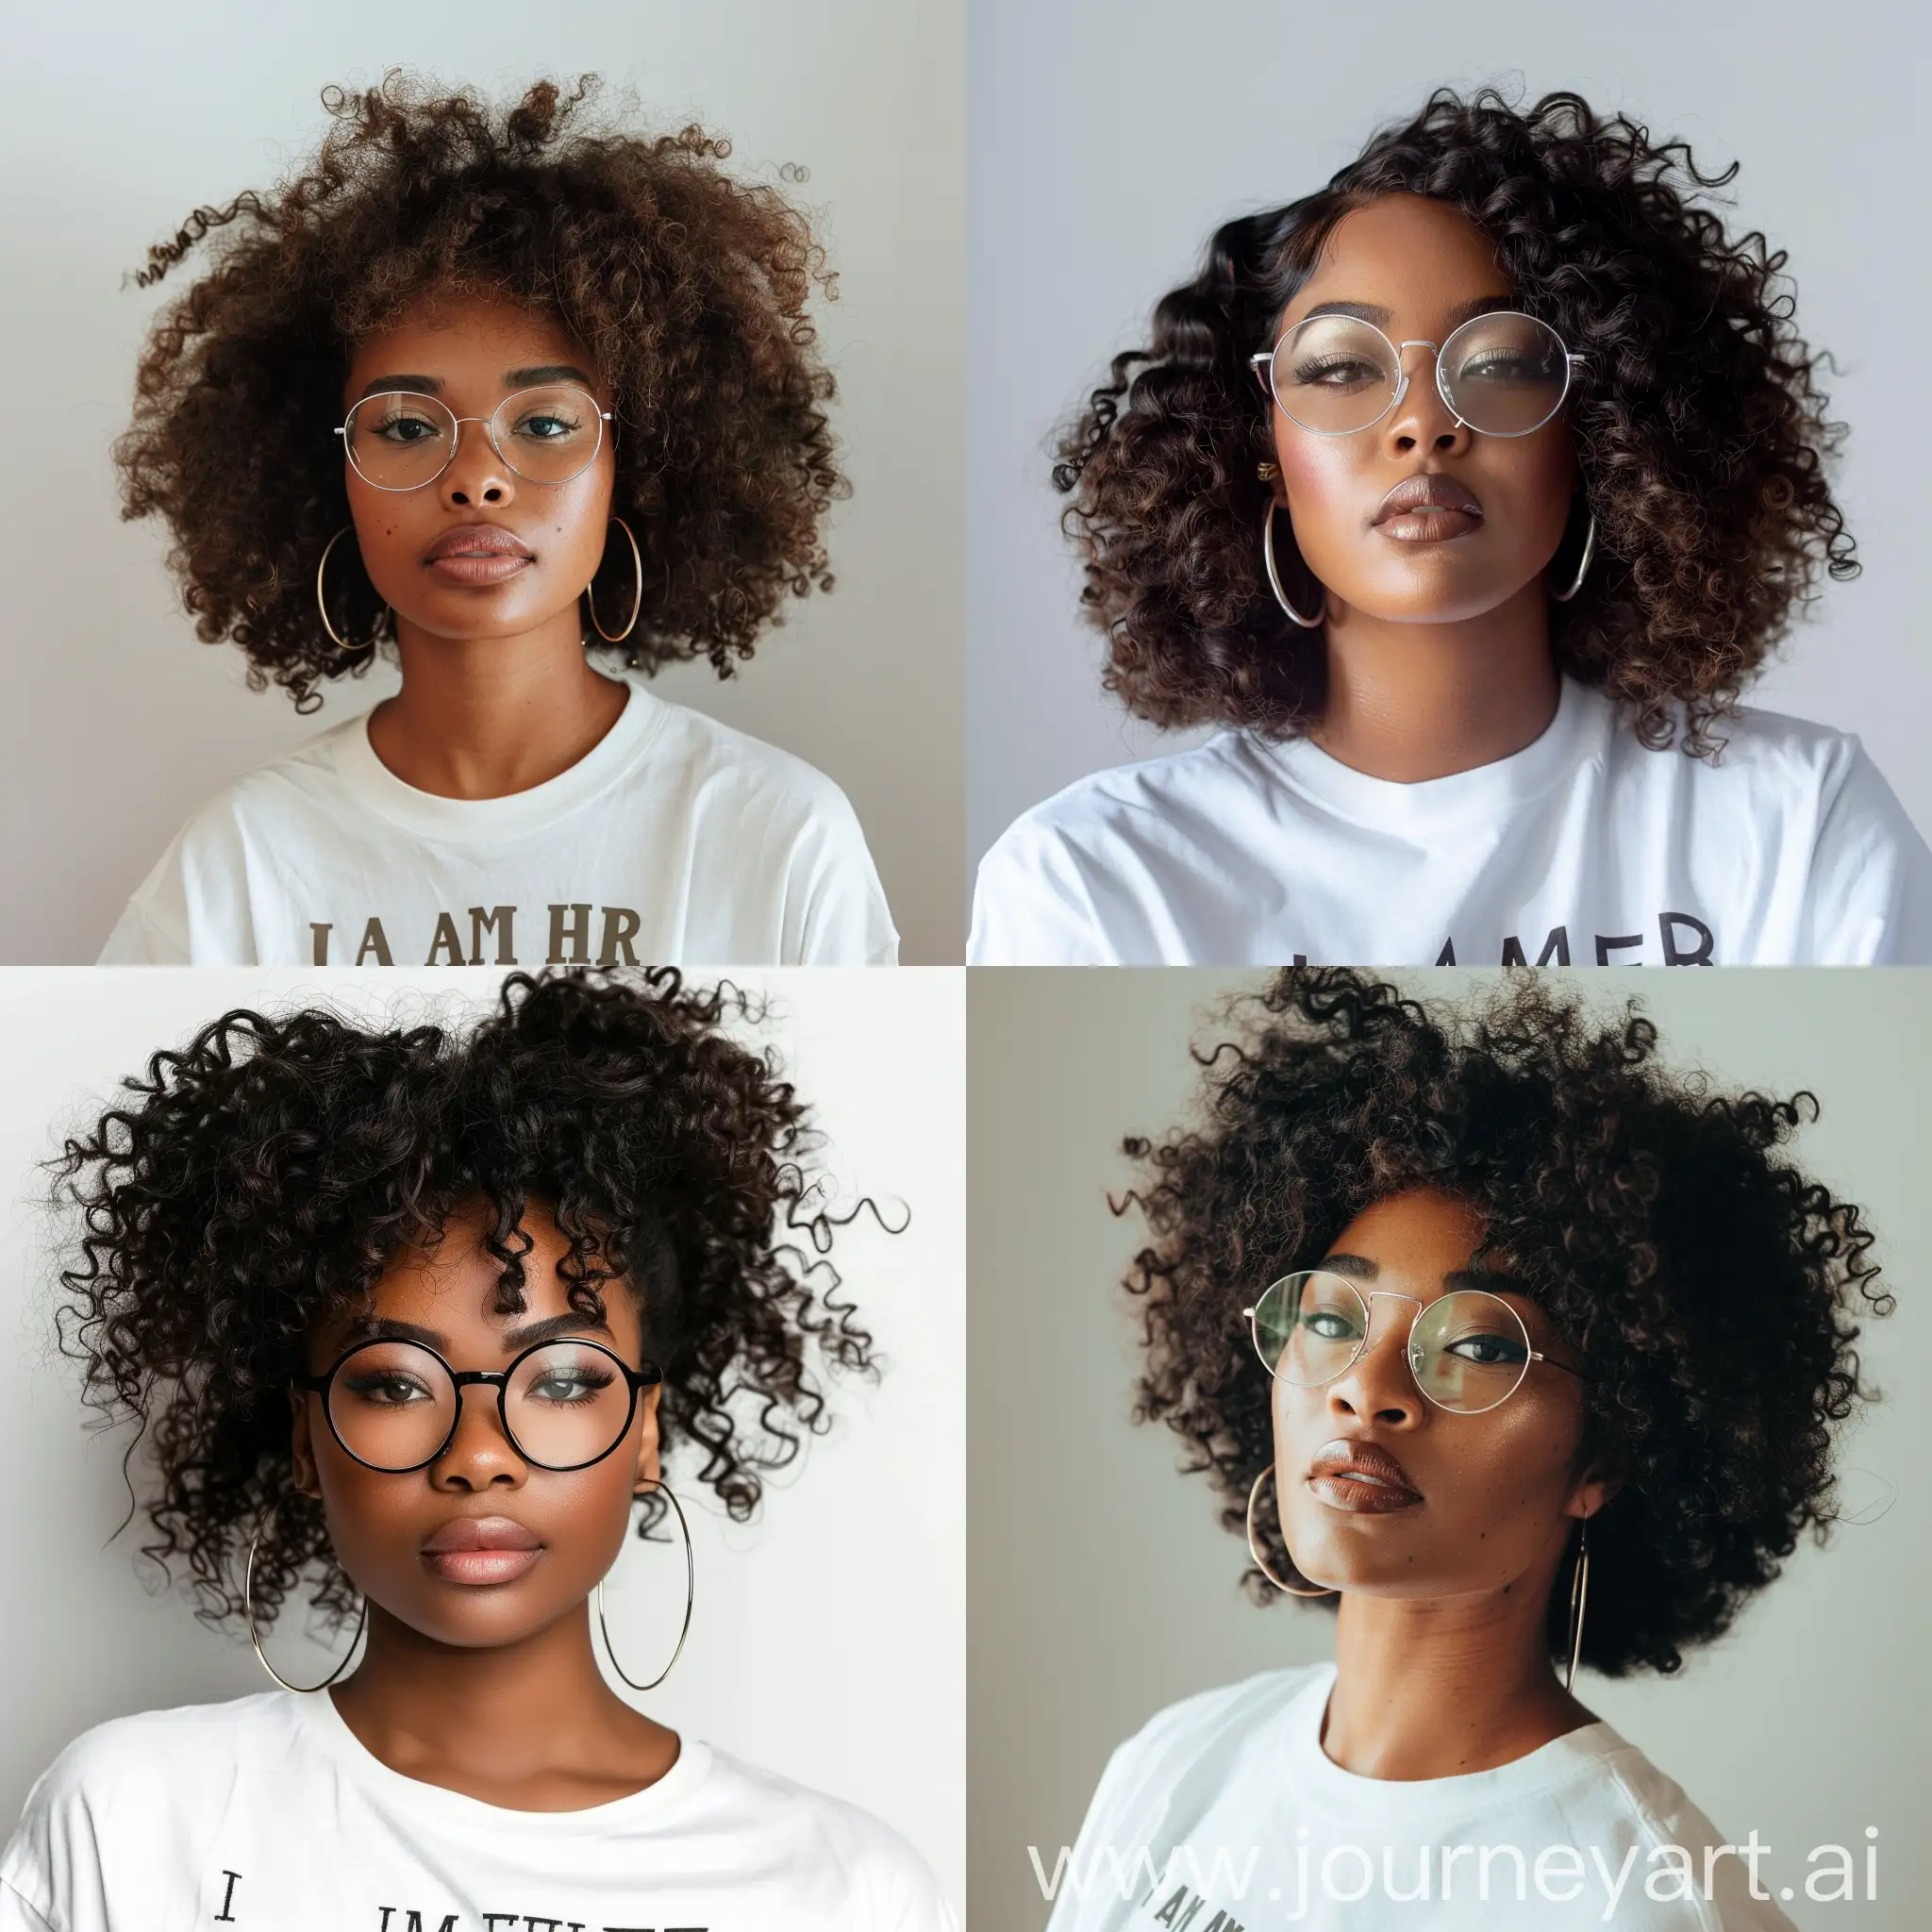 Create a beautiful African American woman with full beautiful curly hair with hoop earrings and soft dewy makeup and a white shirt that says I AM HER she should be wearing glasses and standing in front of a solid white background